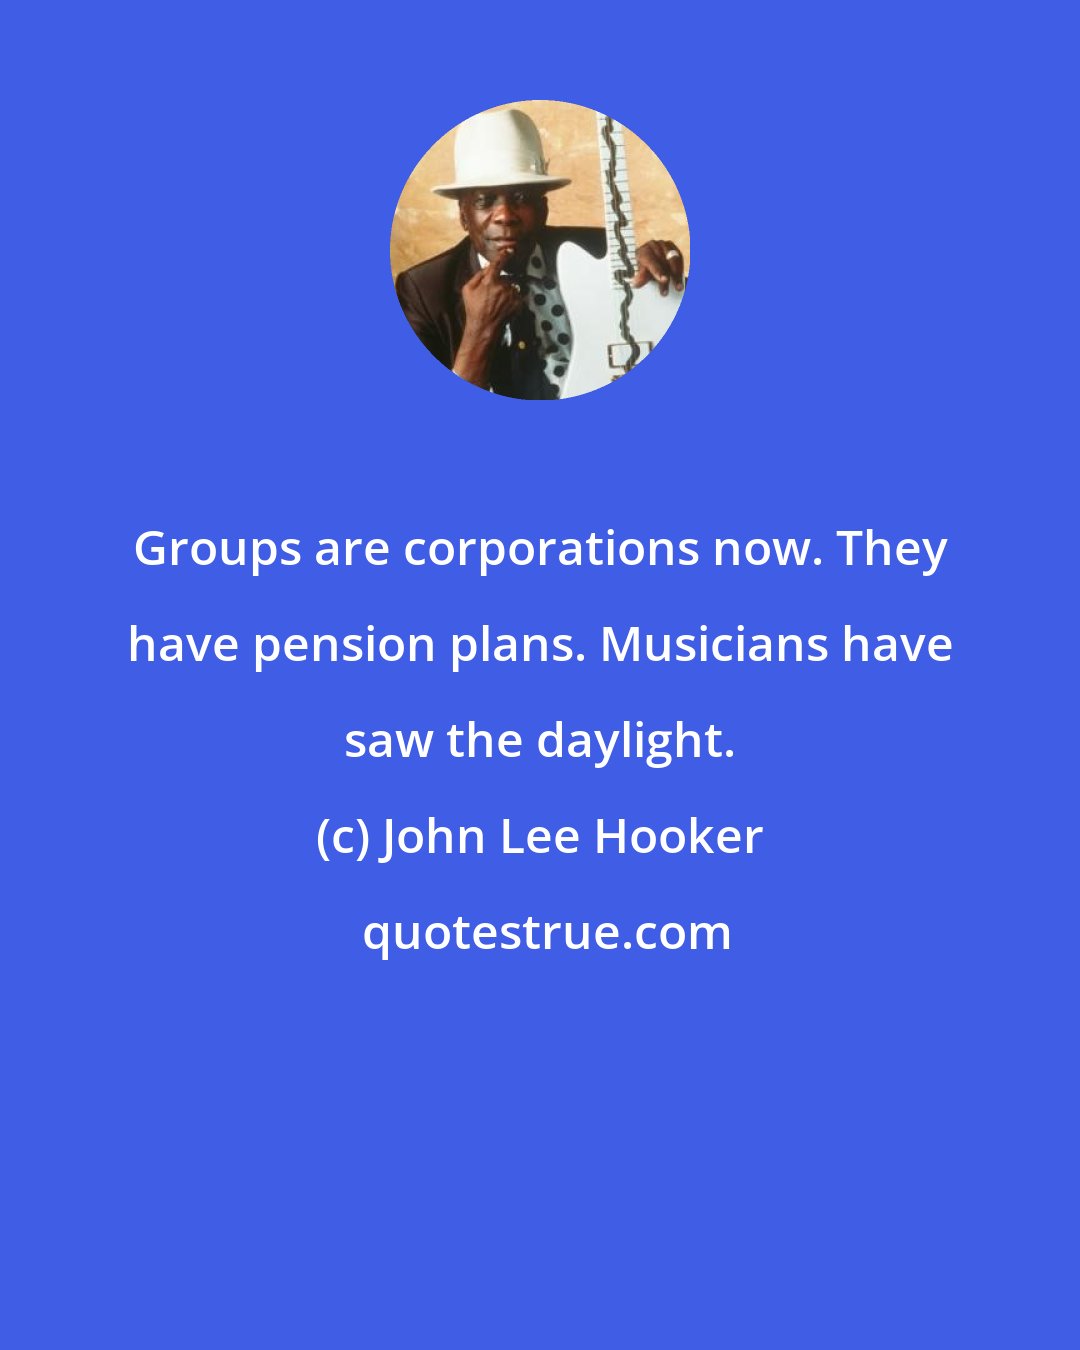 John Lee Hooker: Groups are corporations now. They have pension plans. Musicians have saw the daylight.